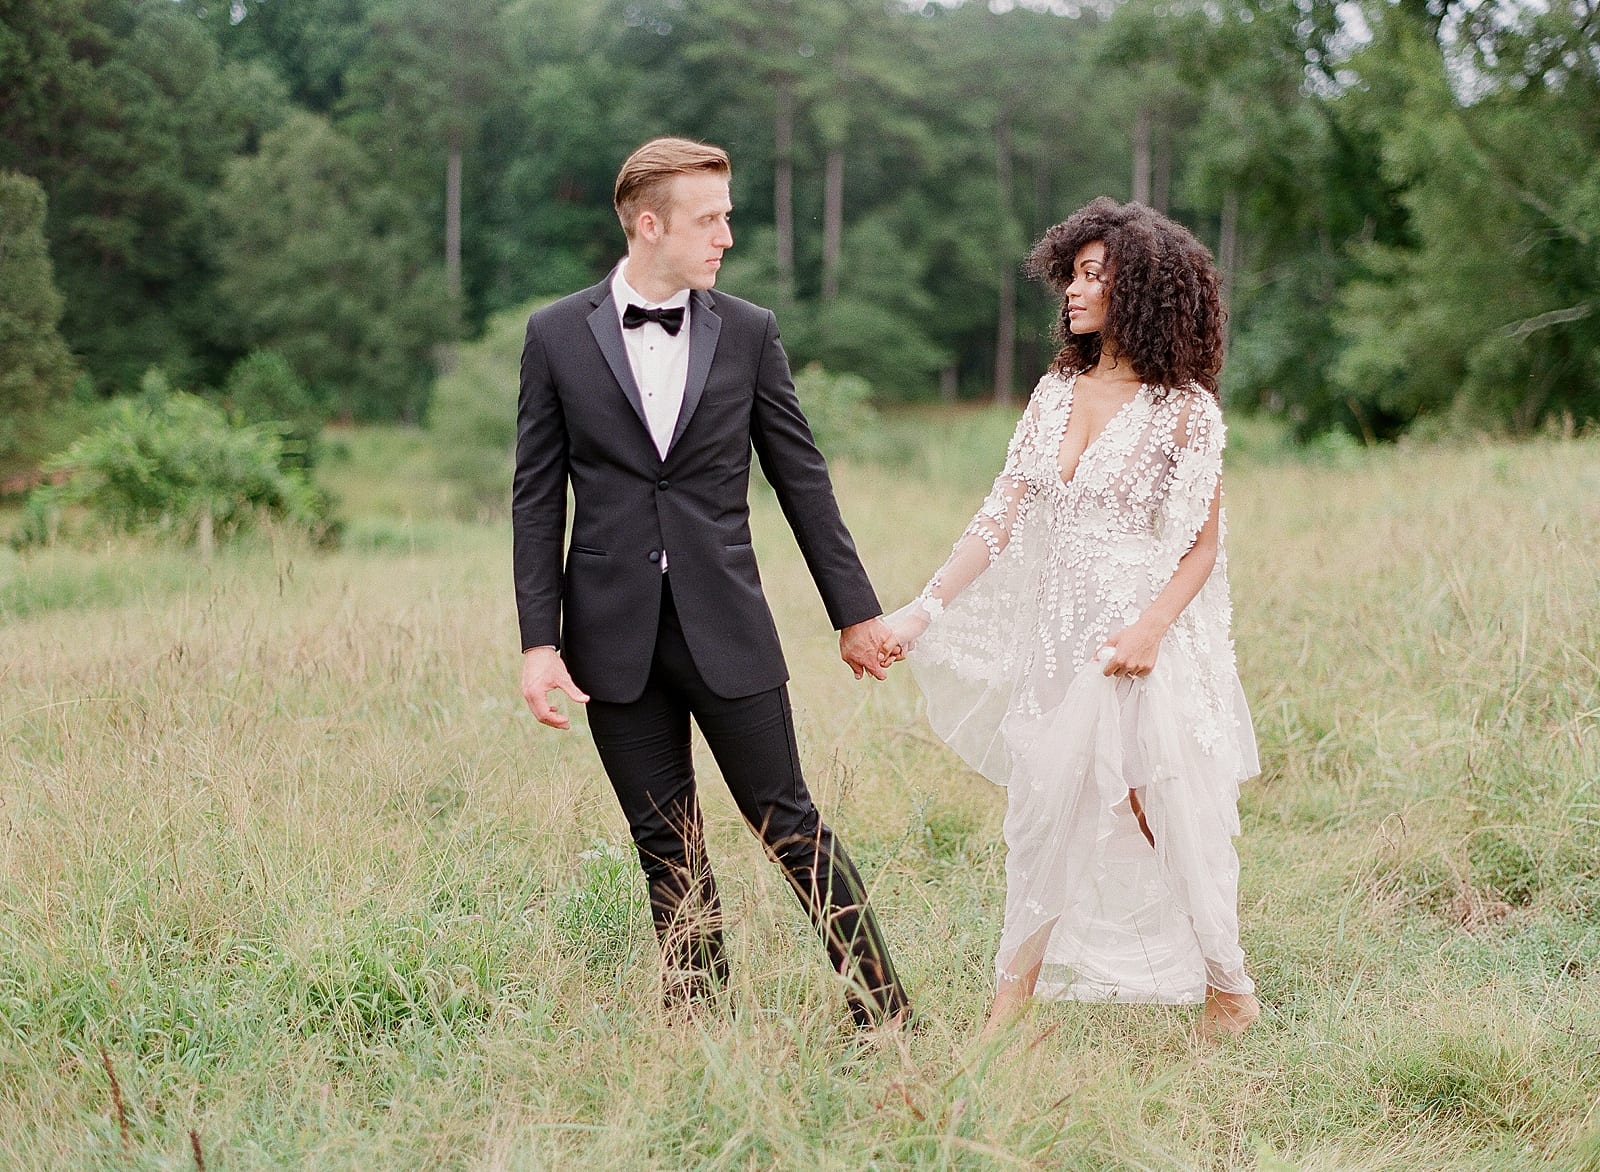 Bride and Groom Holding Hands Walking Through Field Photo